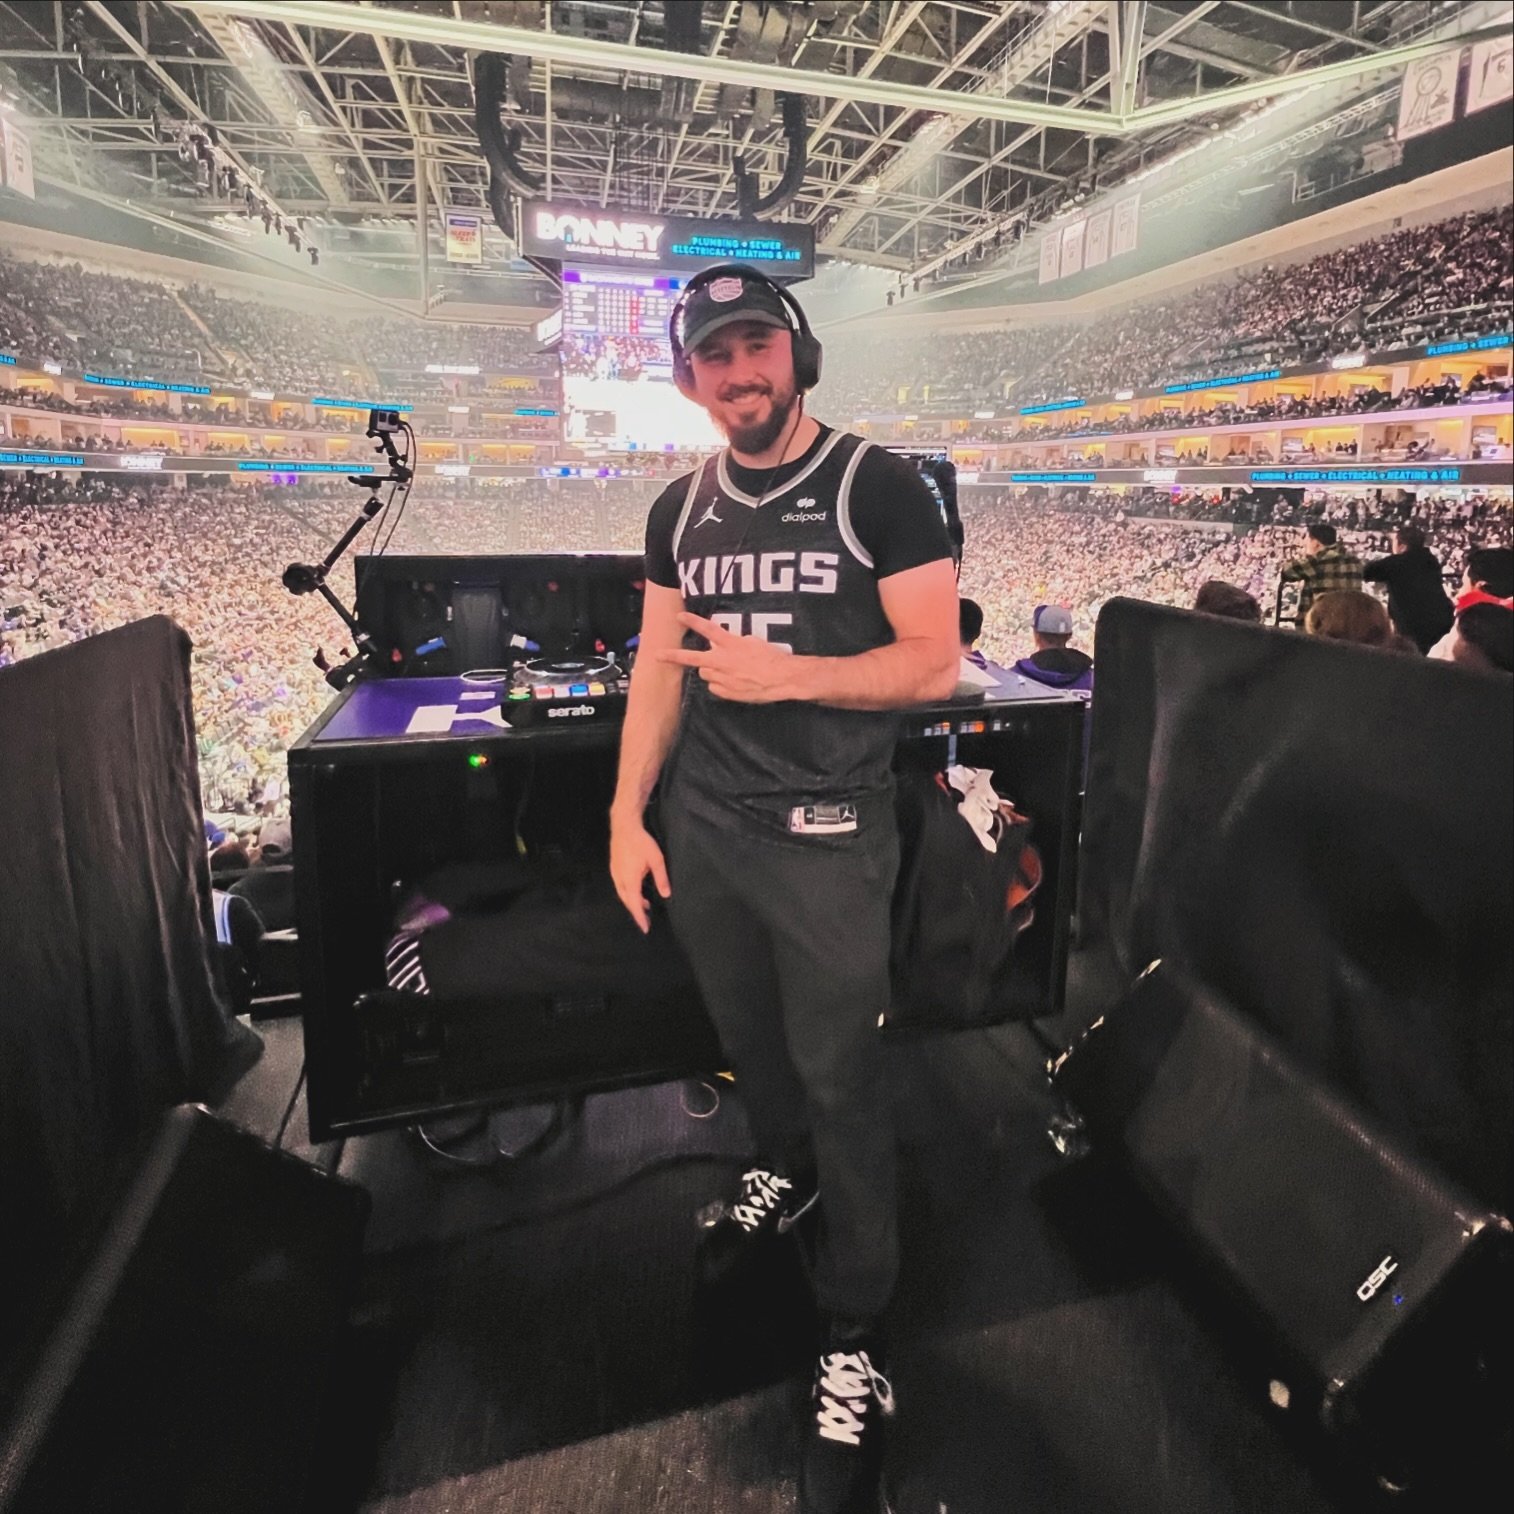 I&rsquo;m Proud to announce I will be tomorrow&rsquo;s in-game Dj for @sacramentokings V @warriors @nba play-in tournament inside @golden1center ! I need all the Kings fans to show up get loud and bring that energy! Let&rsquo;s go KINGS! #sacramentop